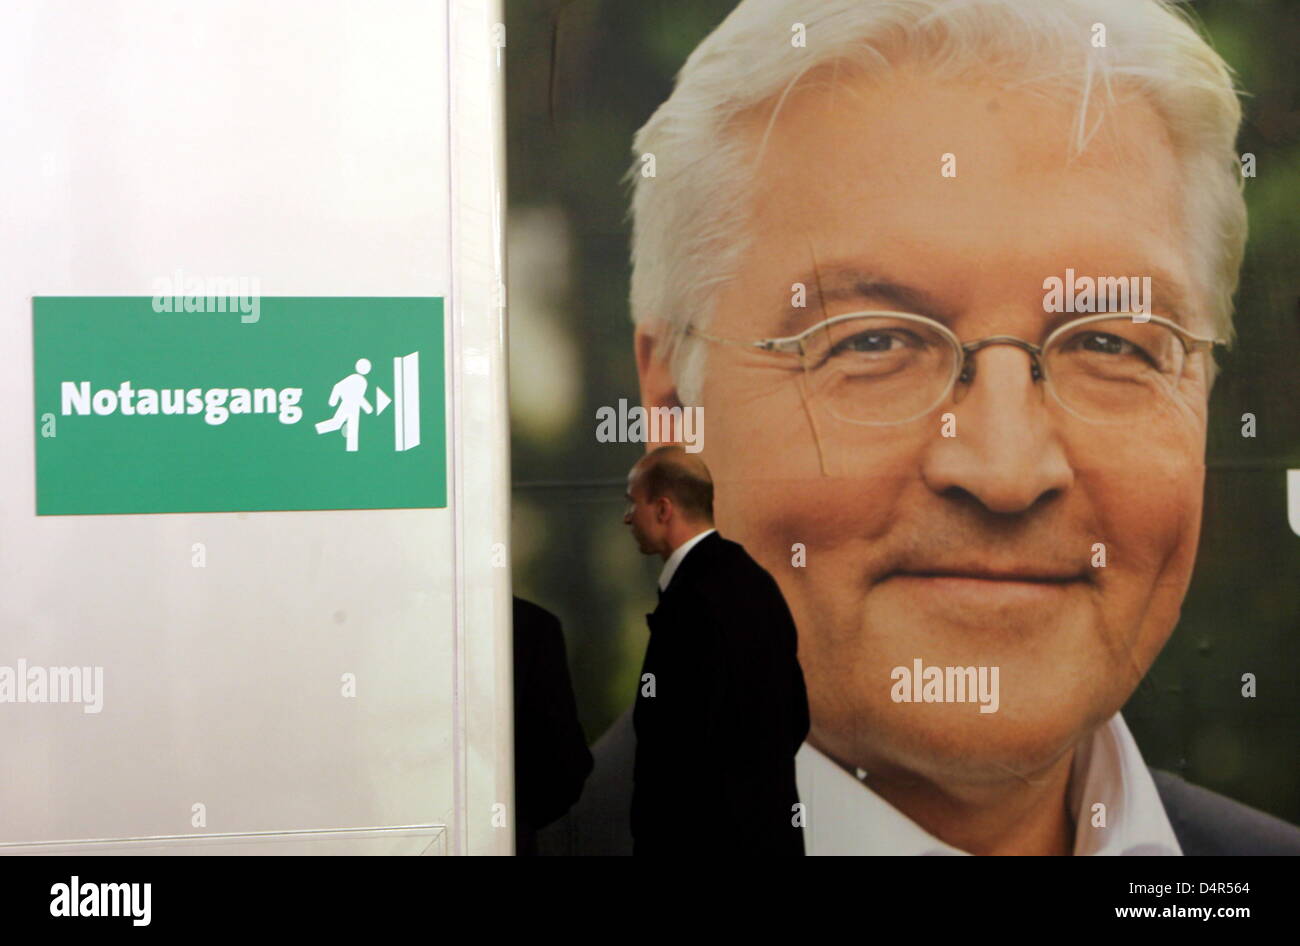 An emergency exit sign next to an election poster of SPD, Social ...